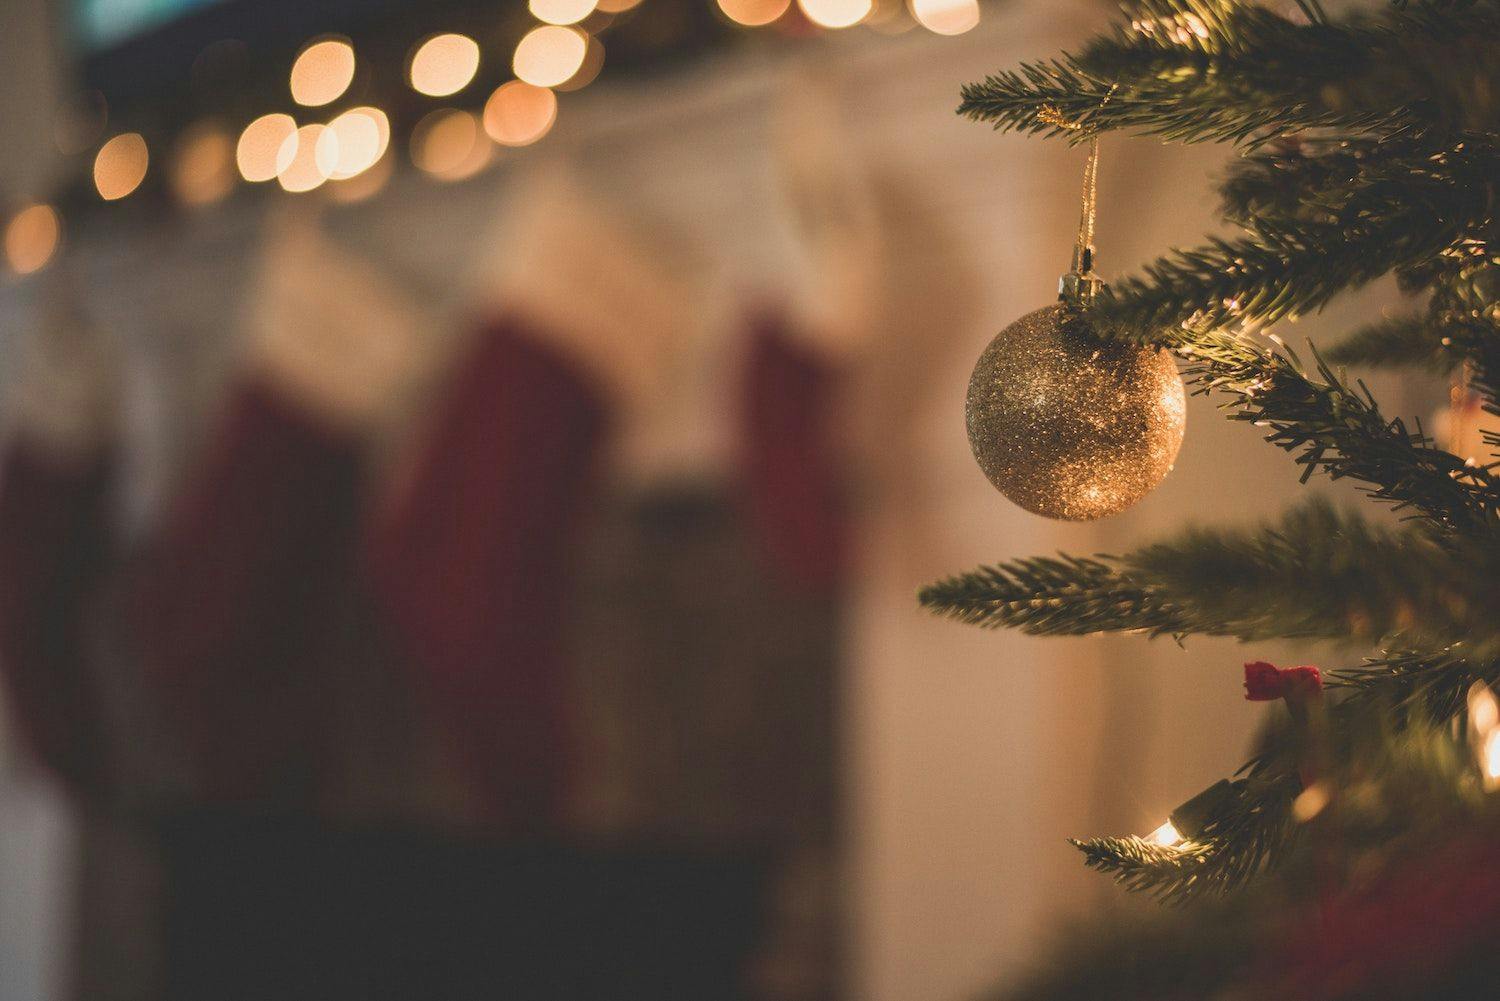 “Christmas creep” - what is it (and how can we navigate it)?